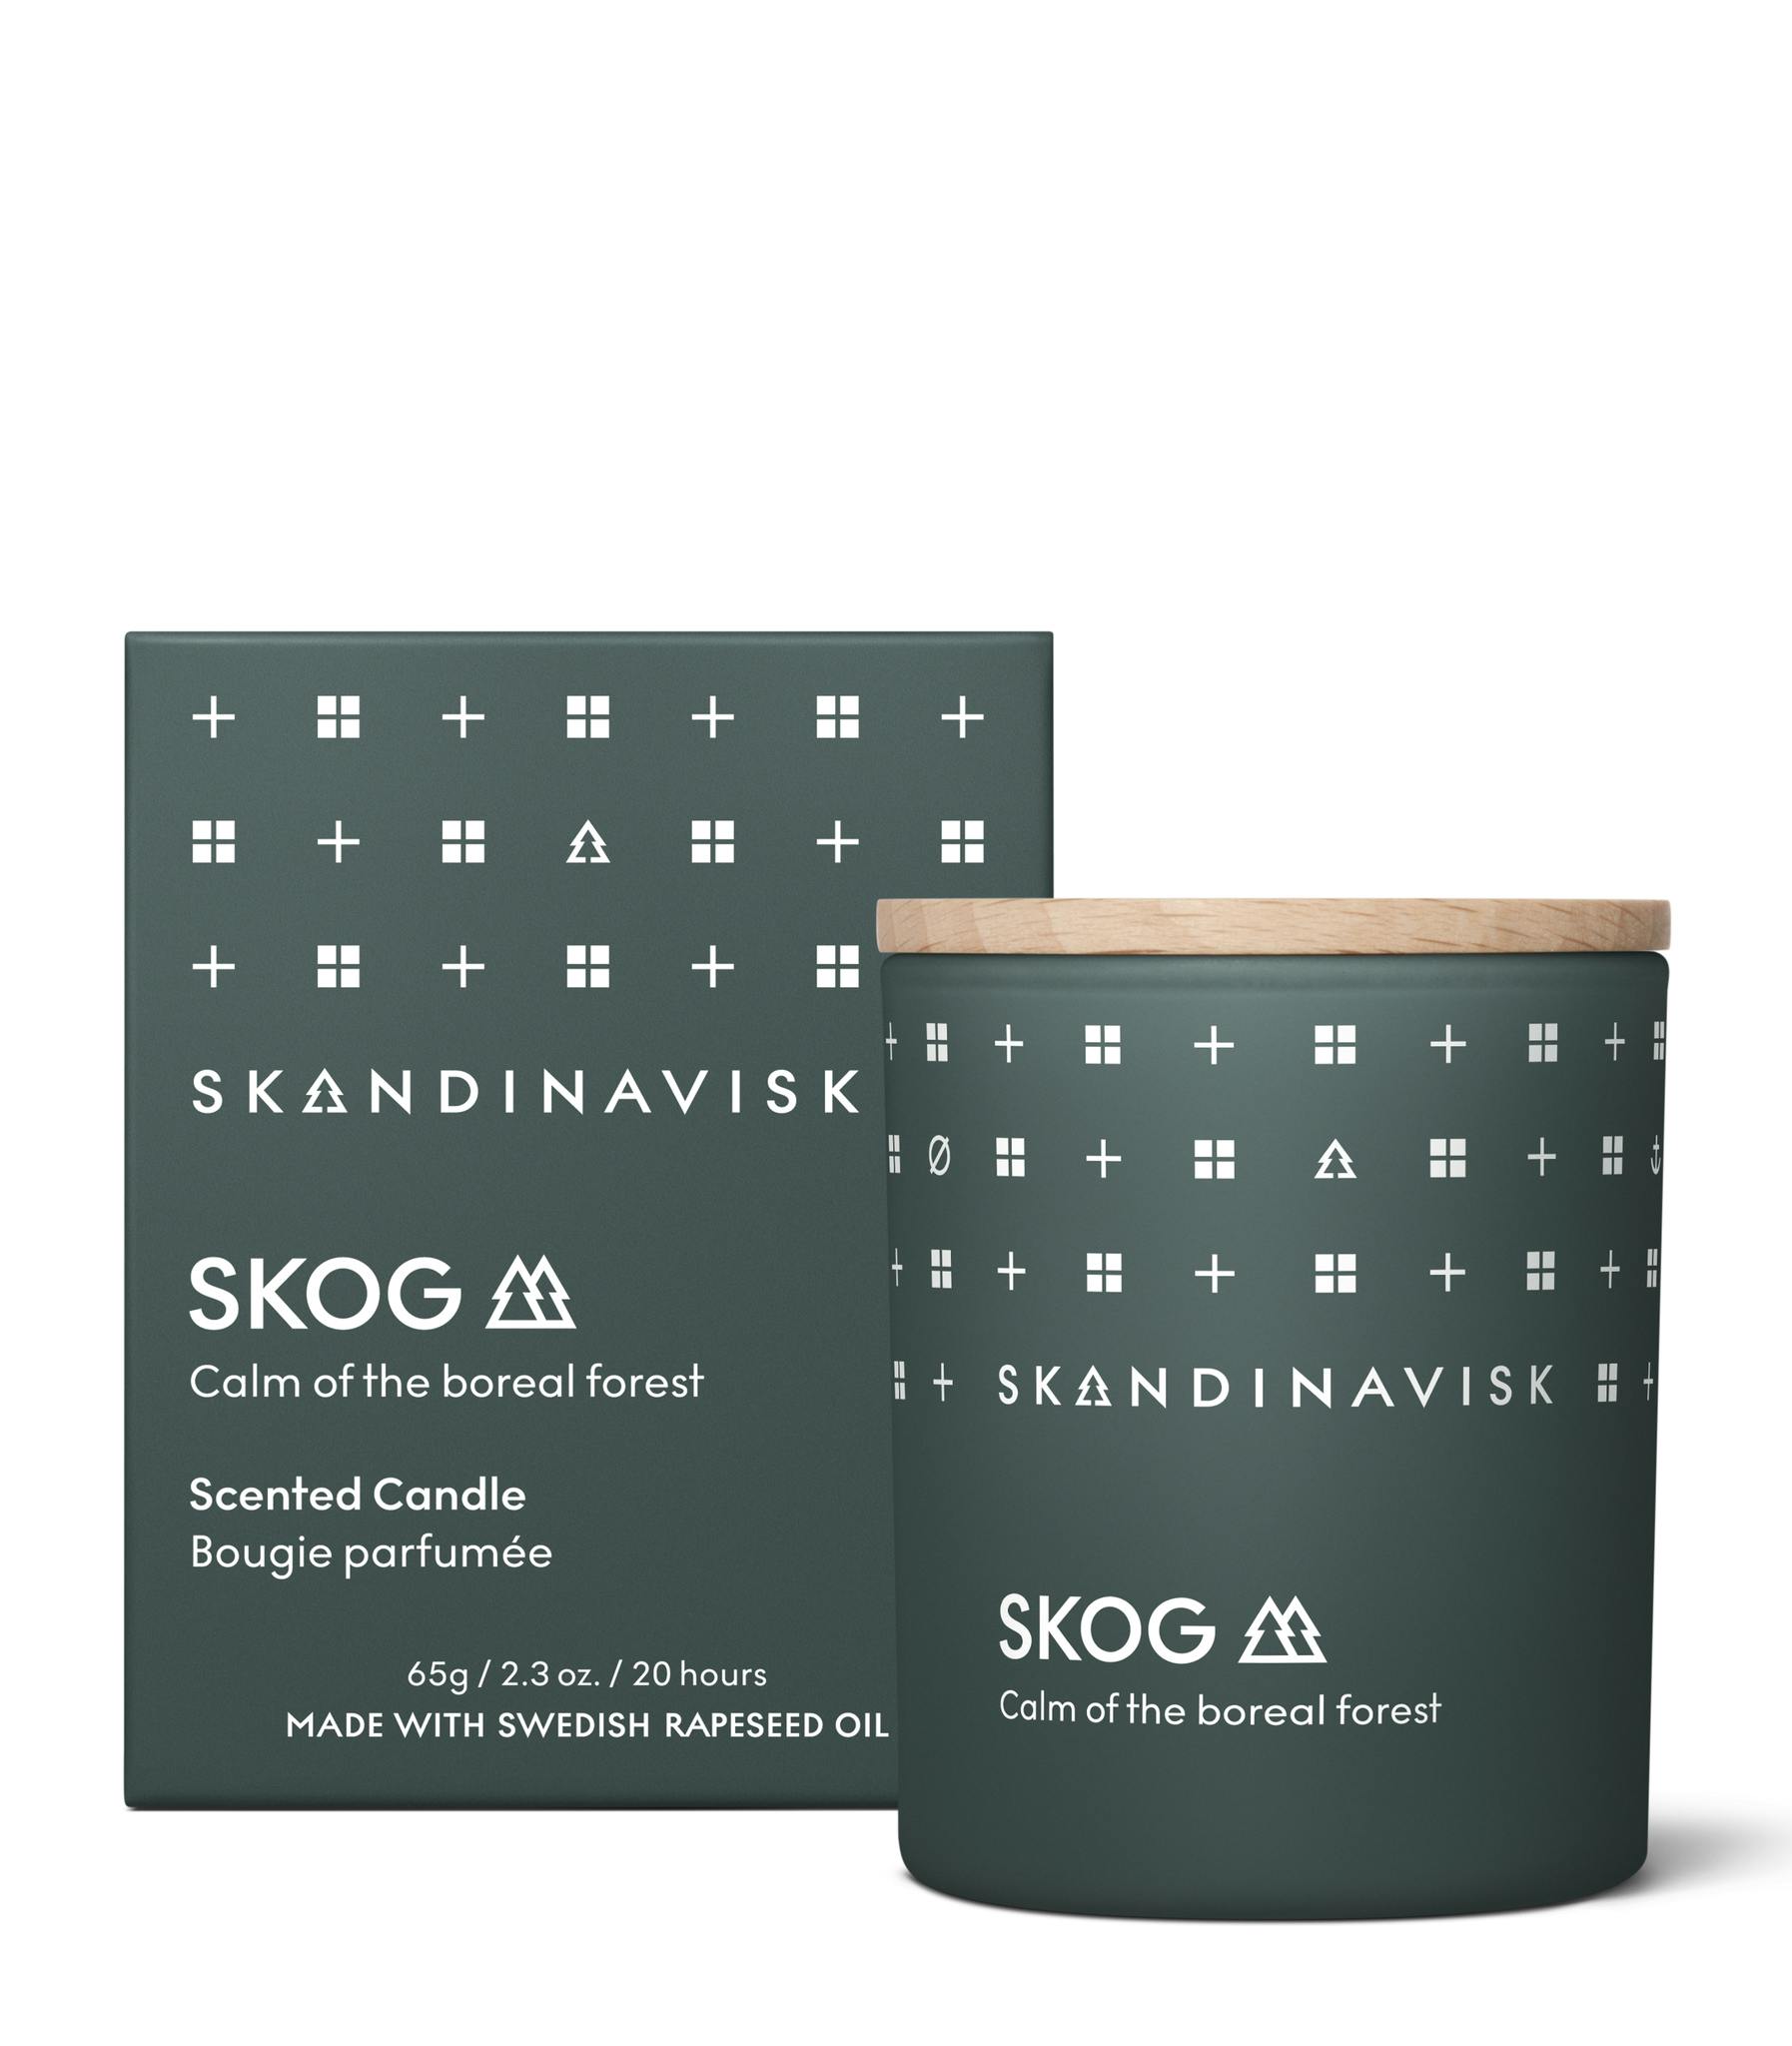 Scented candles, vegan candles, organic candles, Nordic, Skandinavisk, forest scented candle